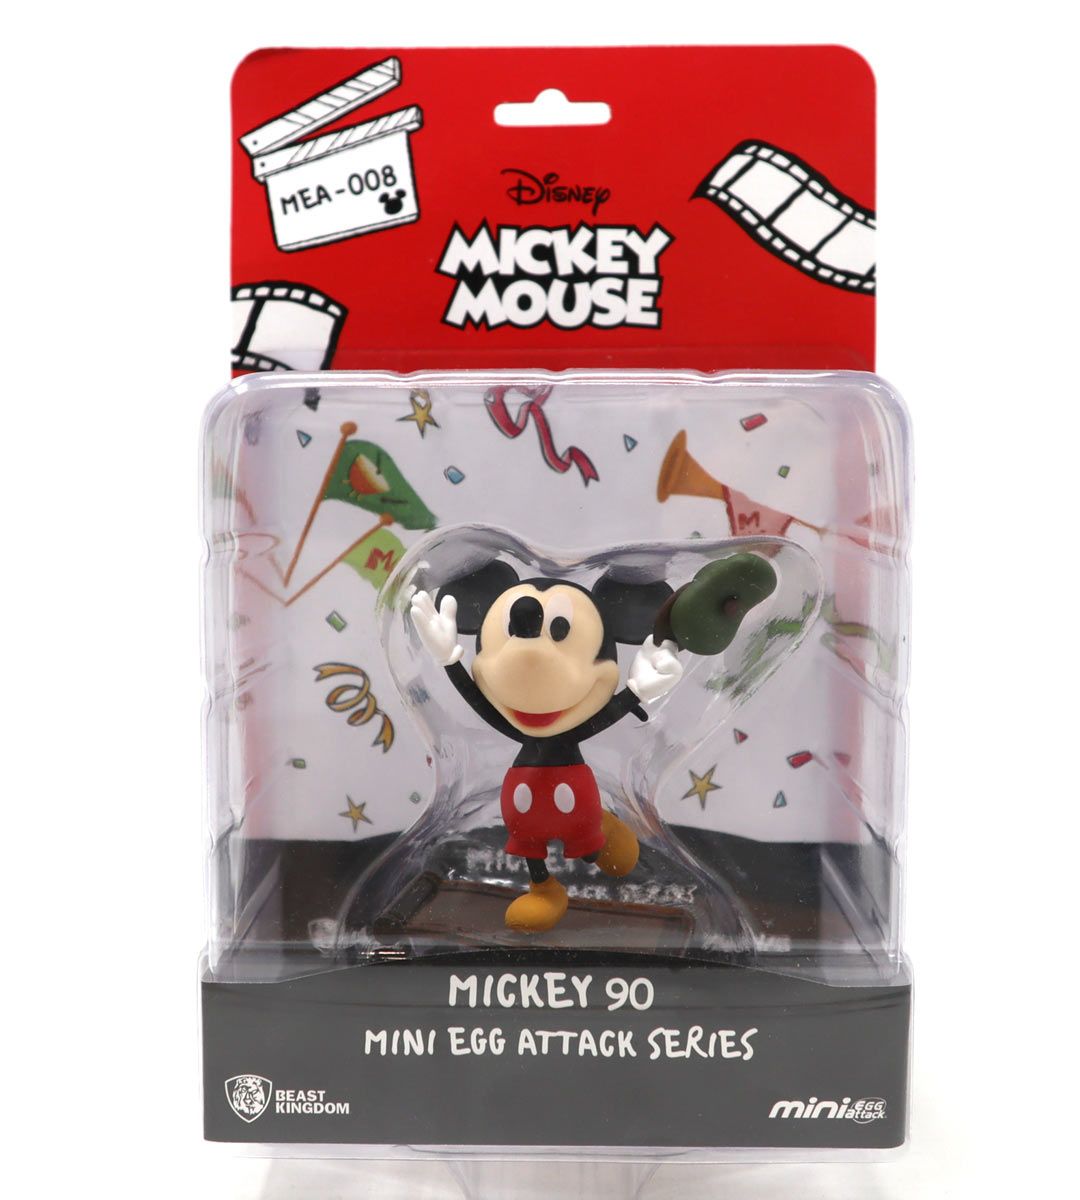 Mini Egg Attack Series - Modern Mickey 90 (Mickey Mouse)